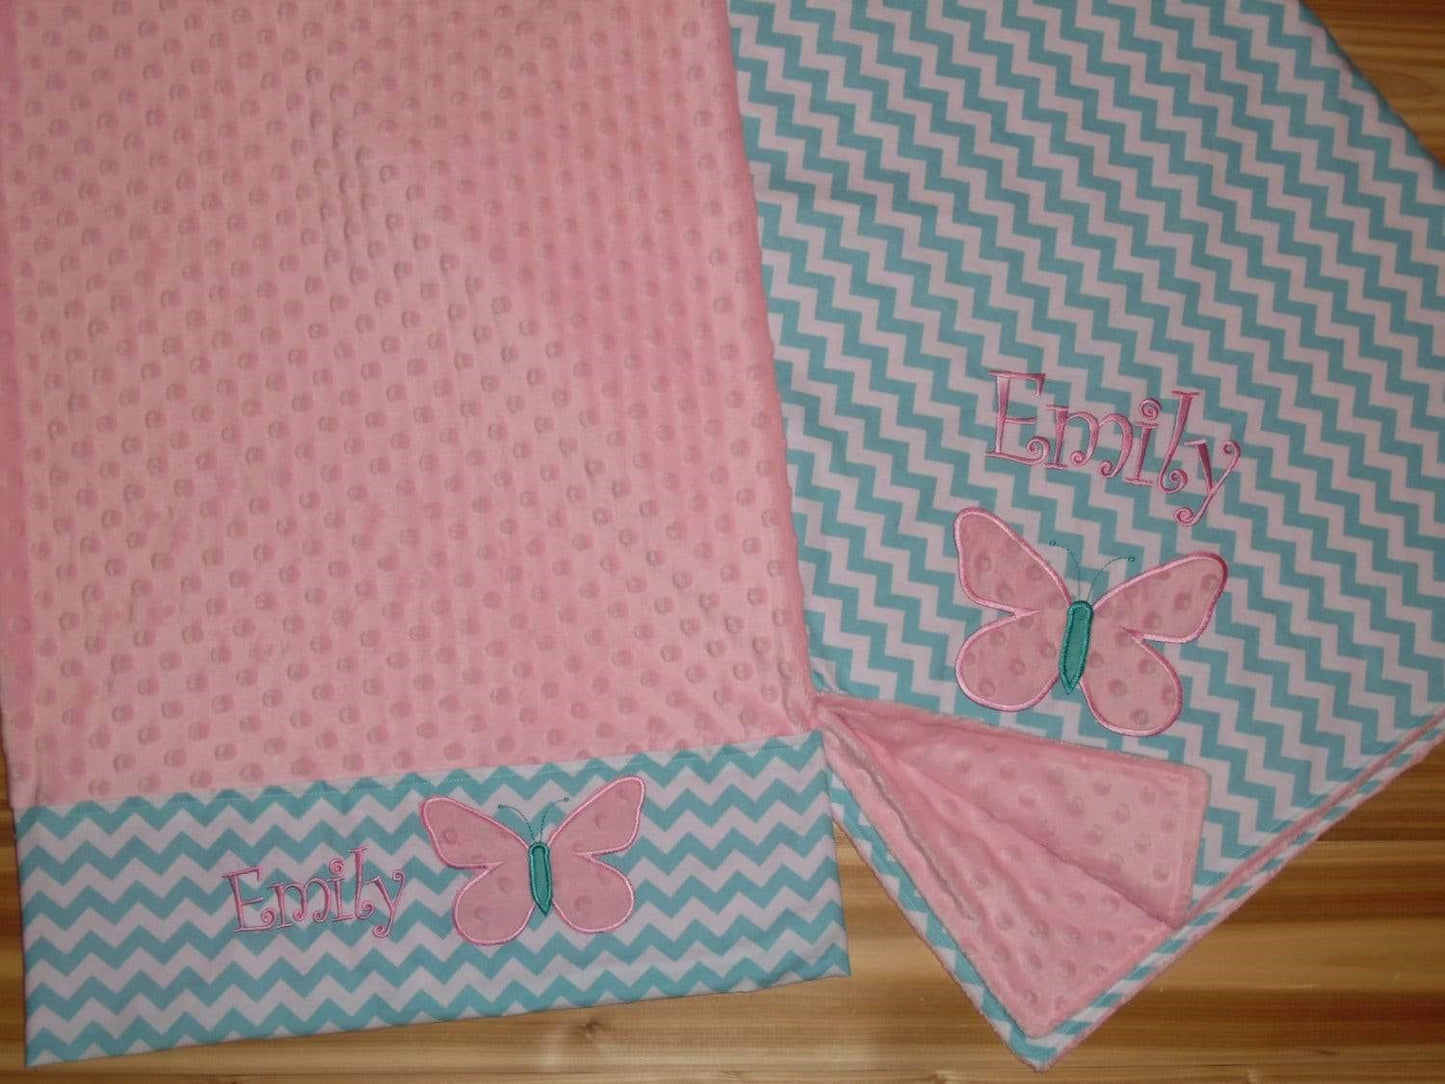 Personalized Minky Pillowcase with Minky Butterfly - Aqua and Pink